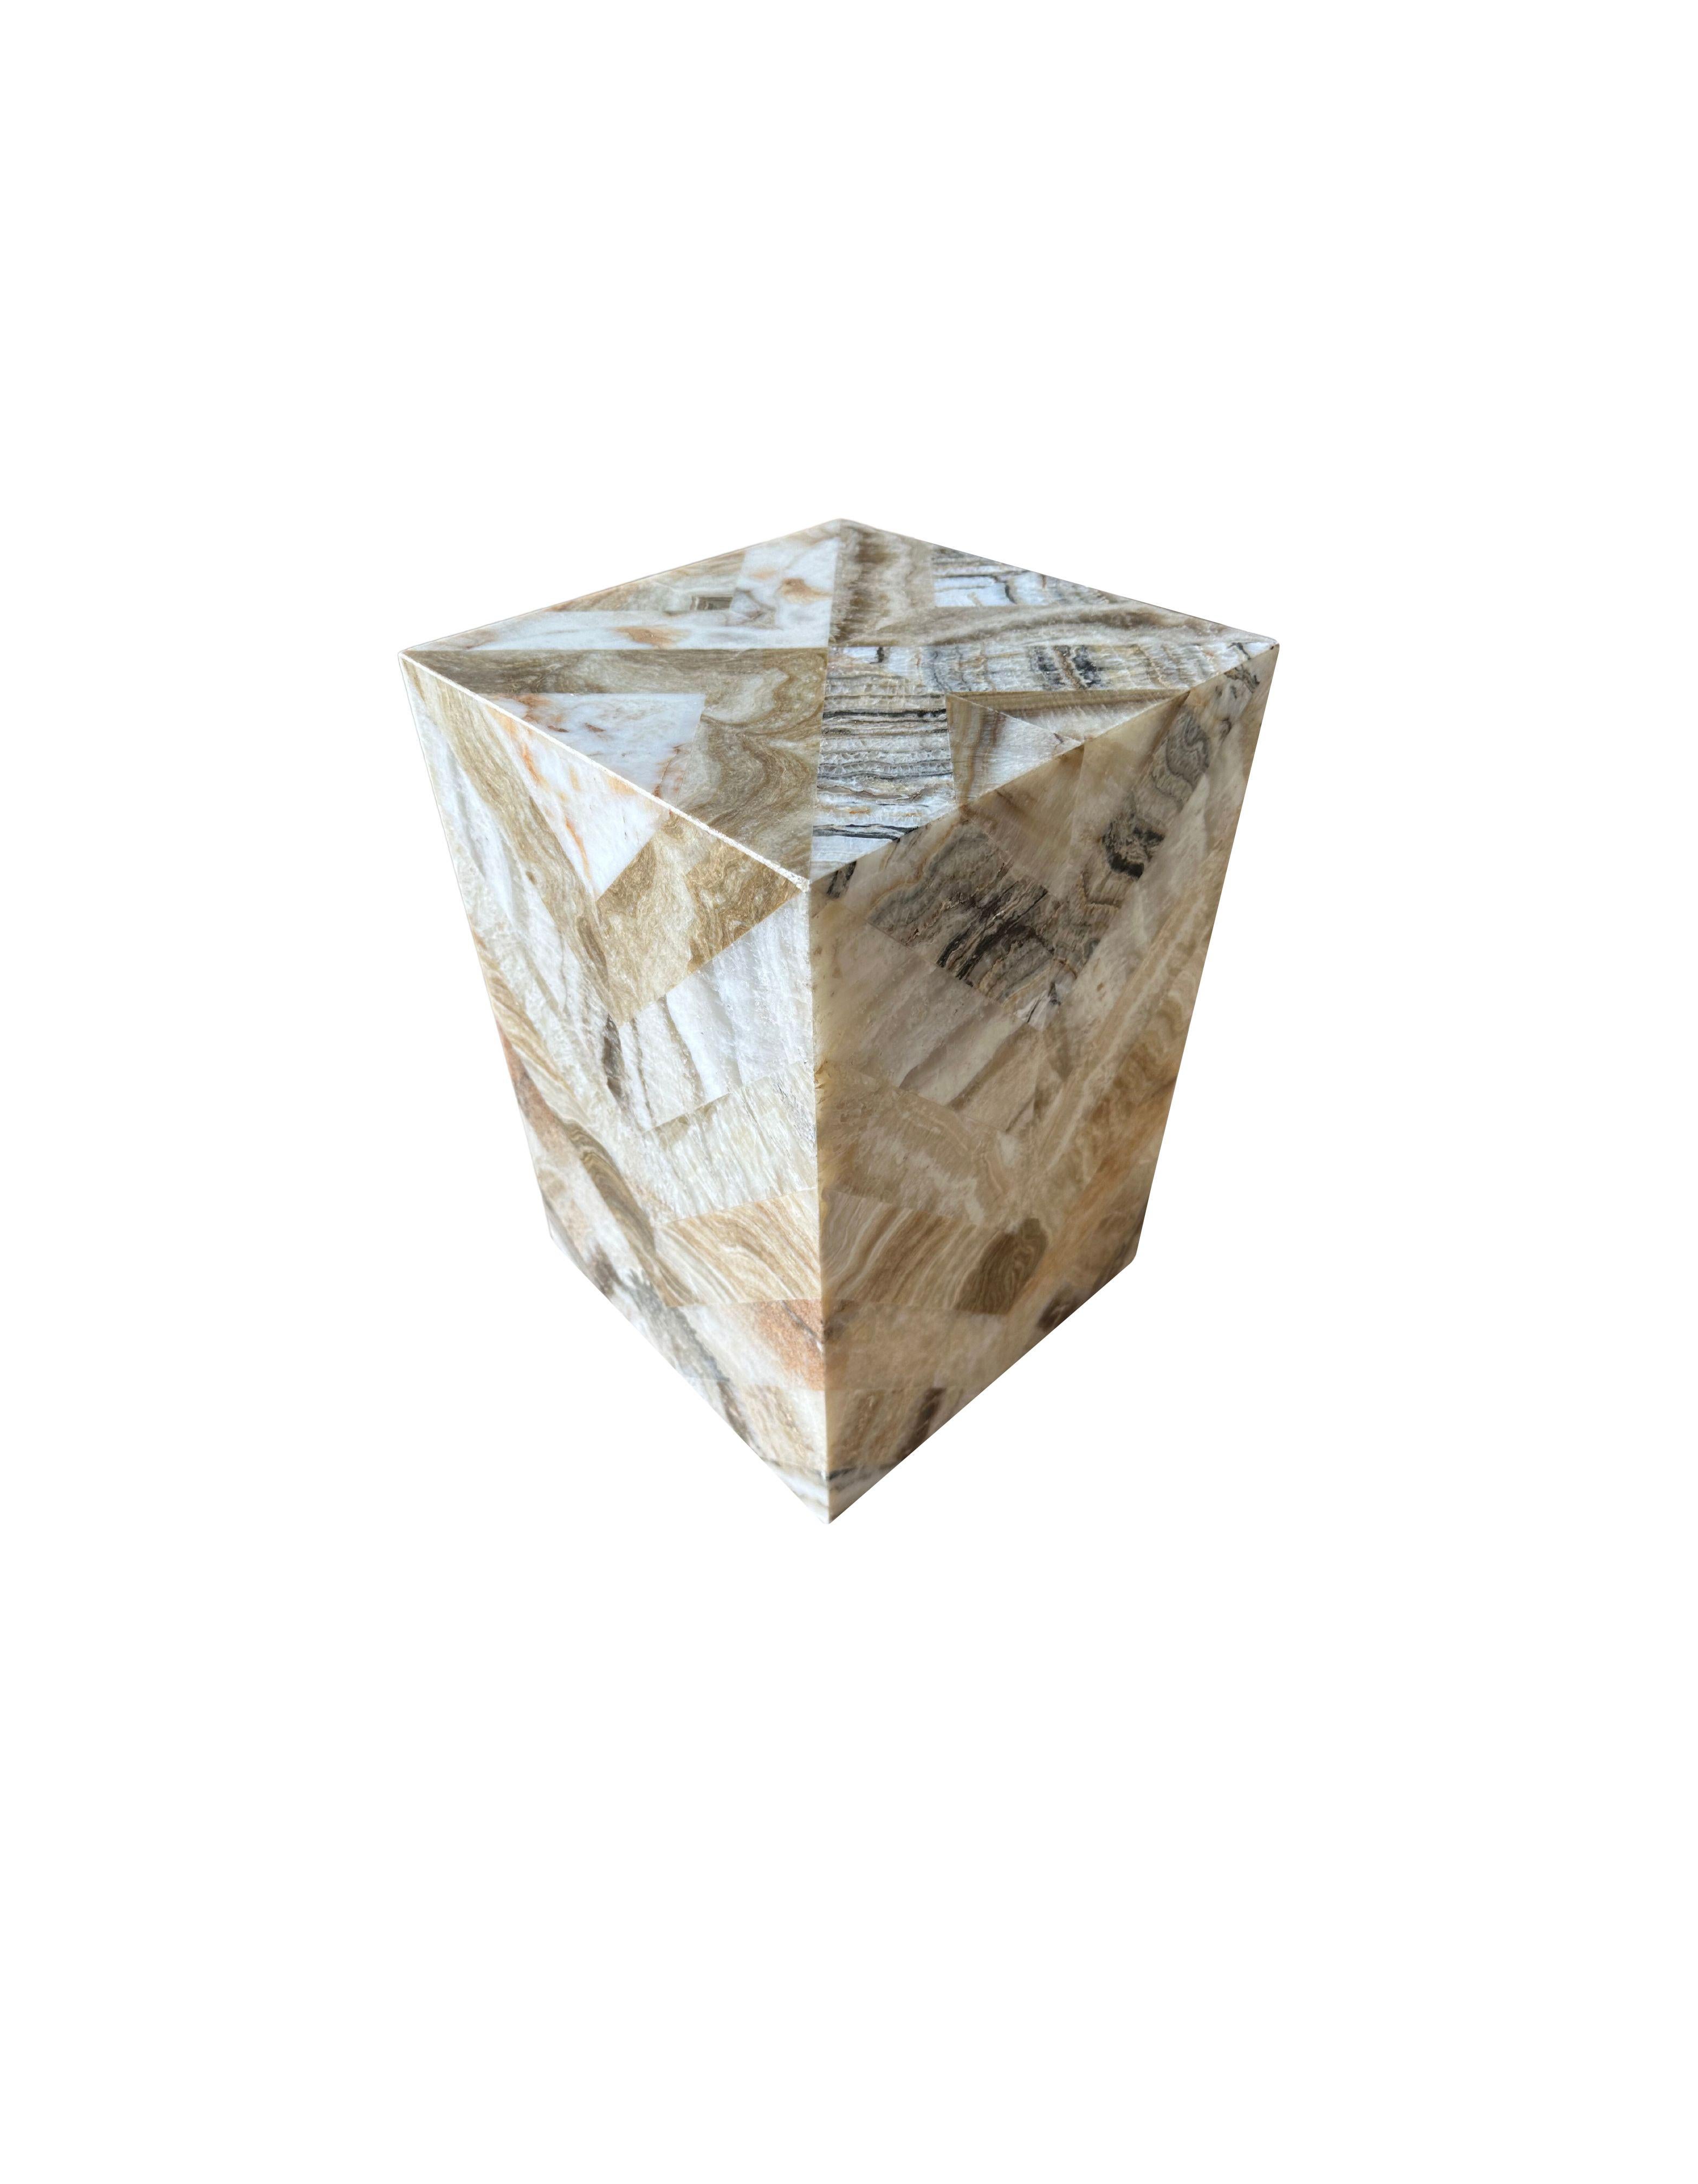 A marble side table or pedestal with wonderful textures and shades. It features a herring bone pattern, with smaller marble cut outs that have been molded together. Hand-crafted by local artisans on the island of Java, this is a wonderful object to